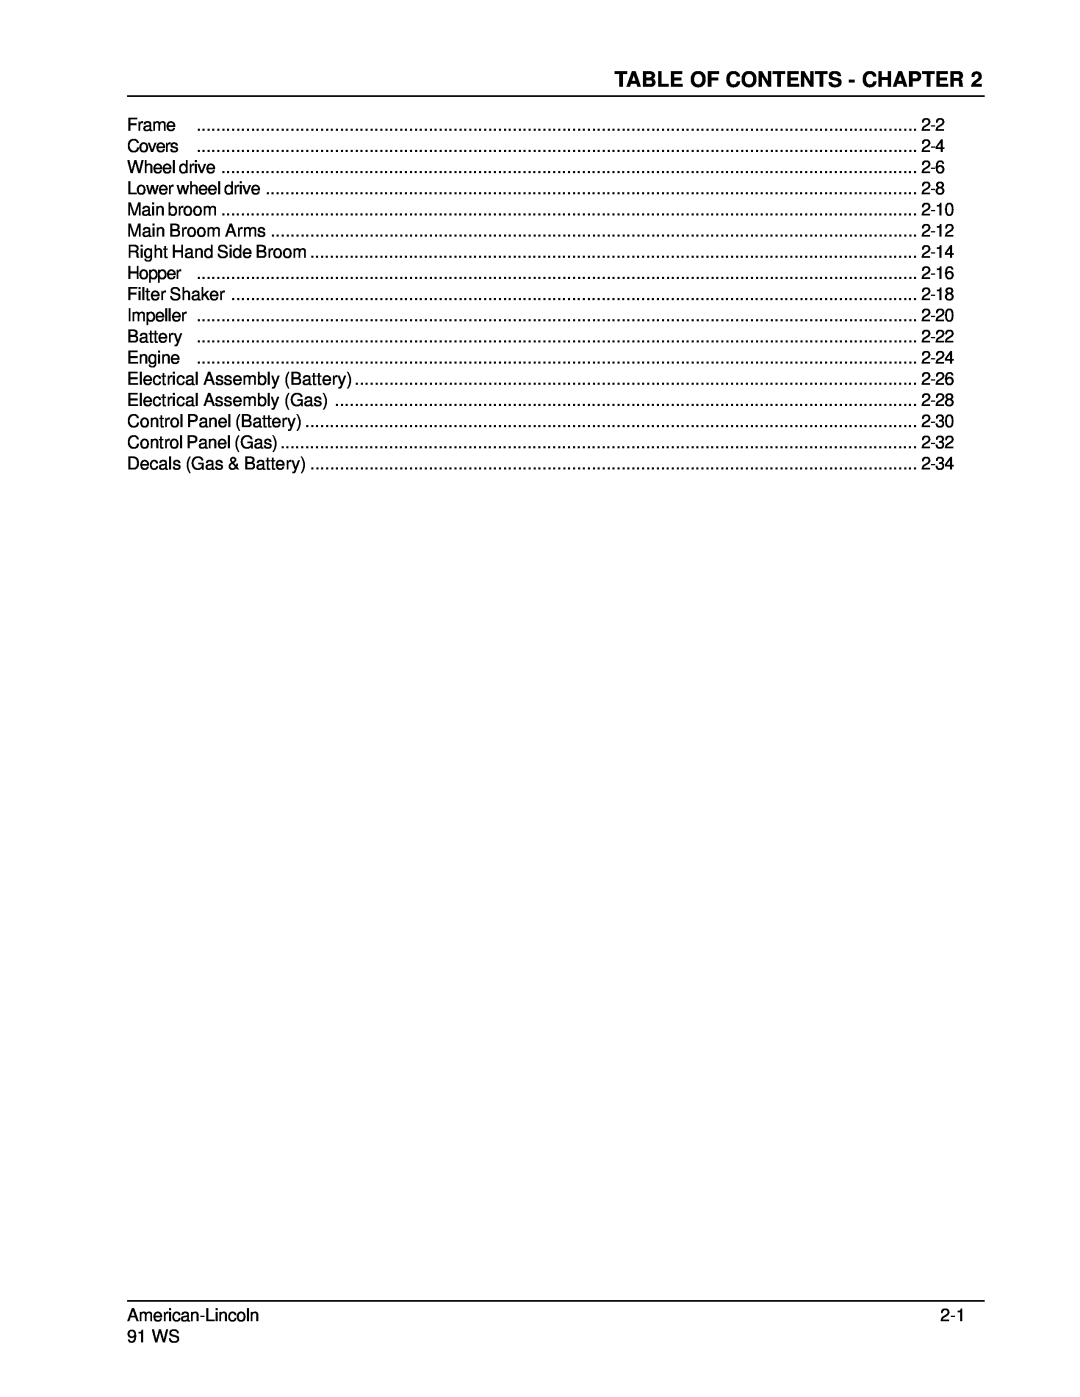 Nilfisk-ALTO 91WS manual Table Of Contents - Chapter 